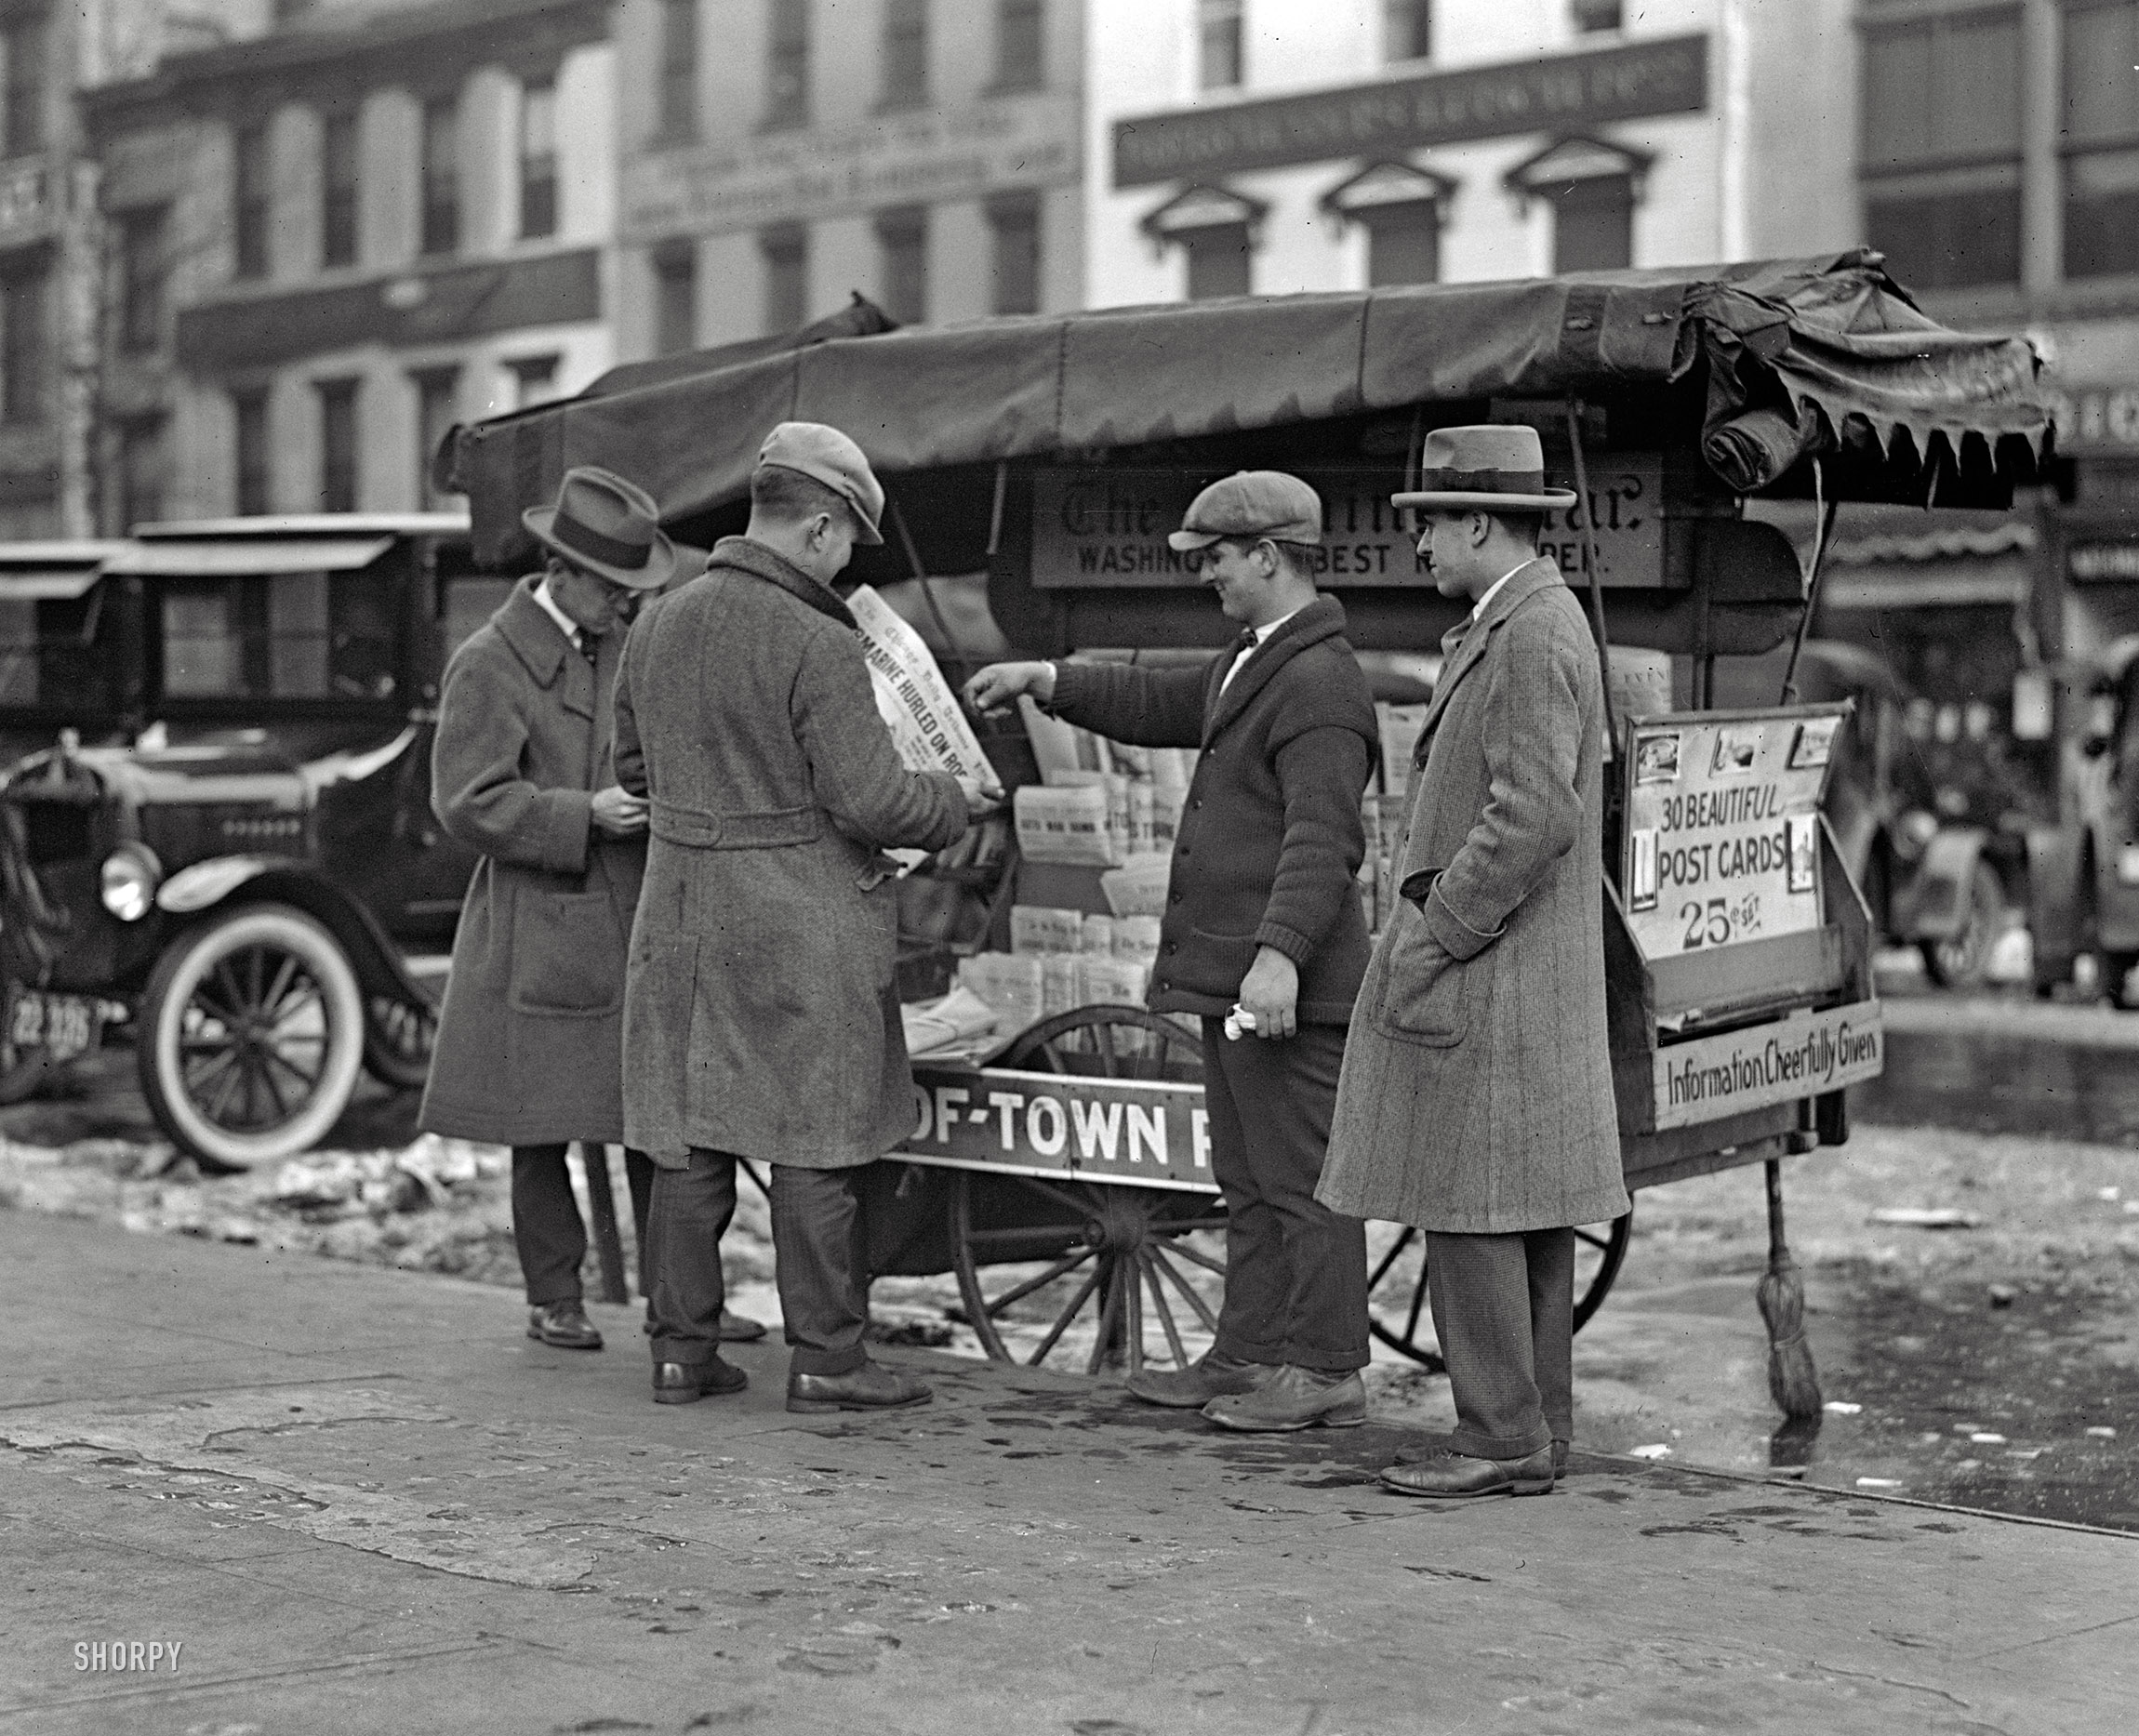 Washington, D.C. "Newsstand, 1925." Out-of-Town Papers, with Information Cheerfully Given. National Photo Company glass negative. View full size.